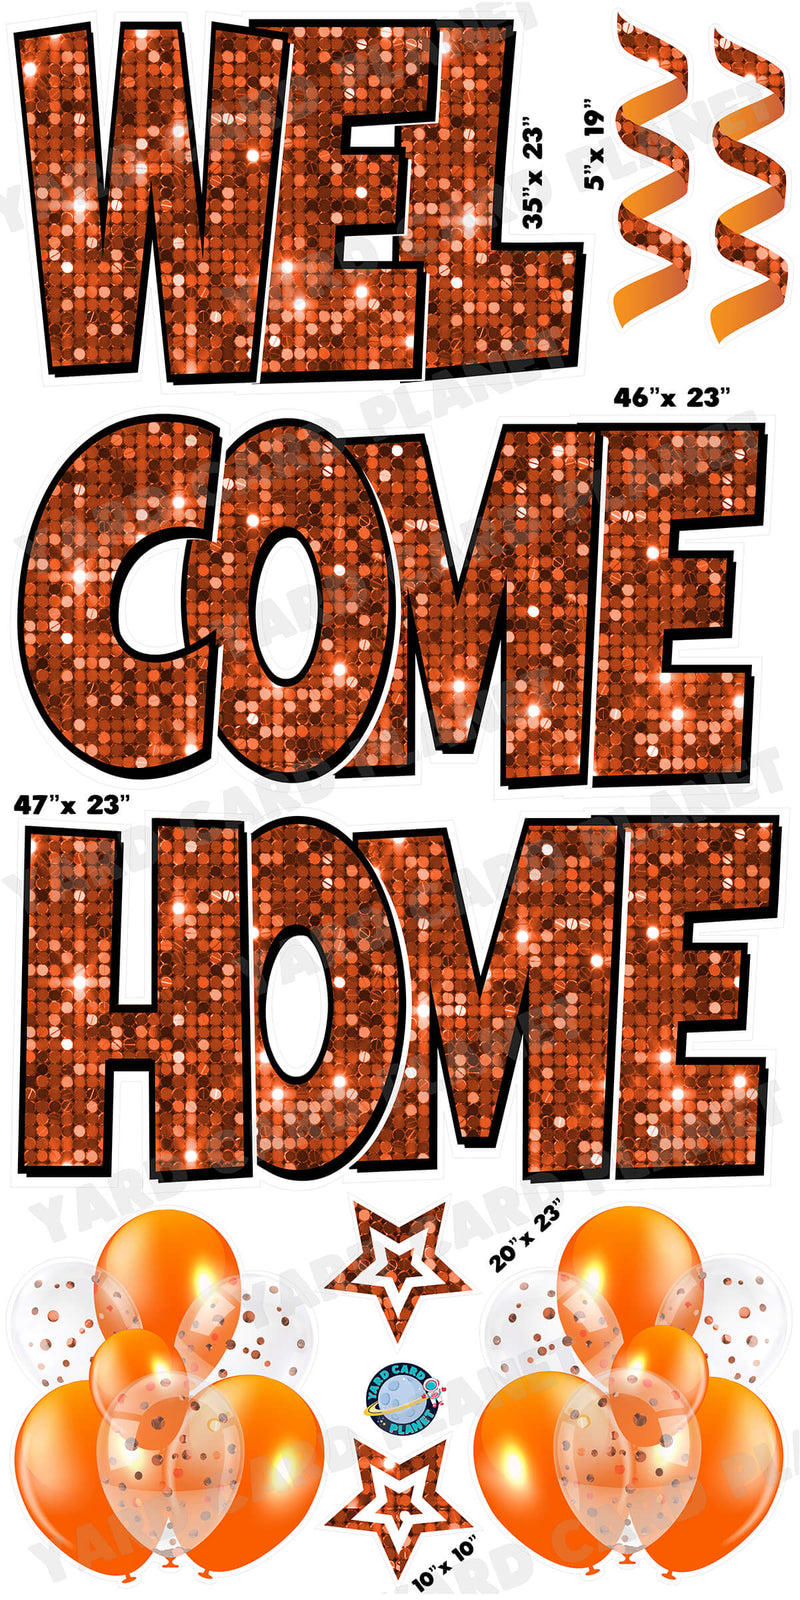 Large 23" Welcome Home Yard Card EZ Quick Sets in Luckiest Guy Font and Flair in Orange Sequin Pattern